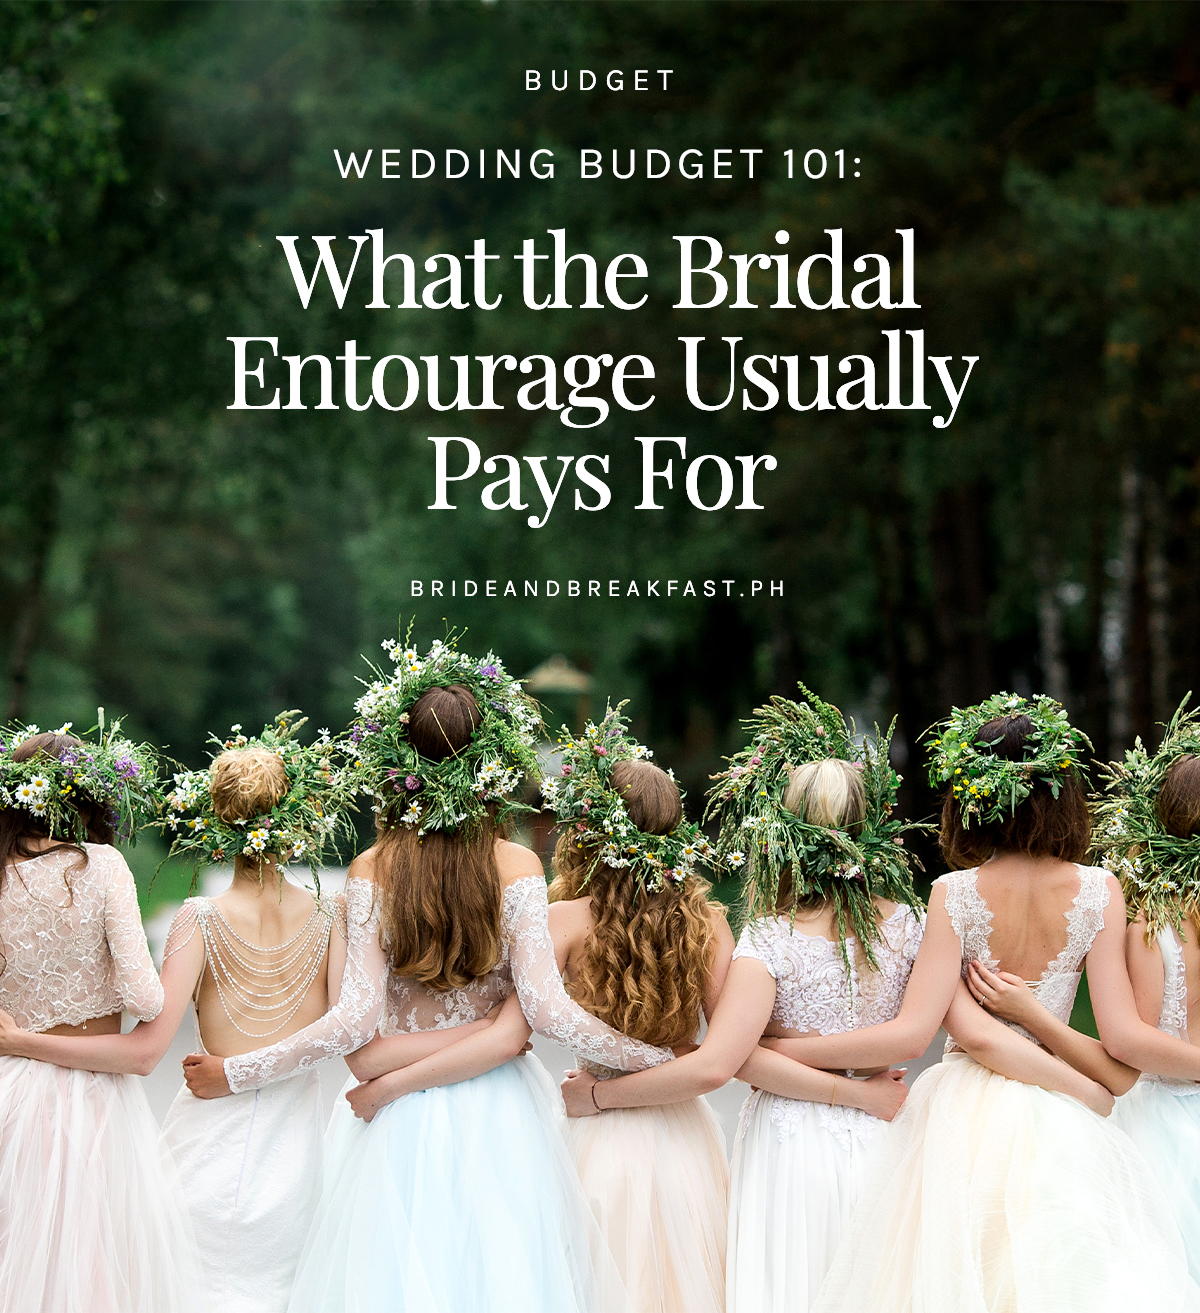 Wedding Budget 101: What the Bridal Entourage Usually Pays For